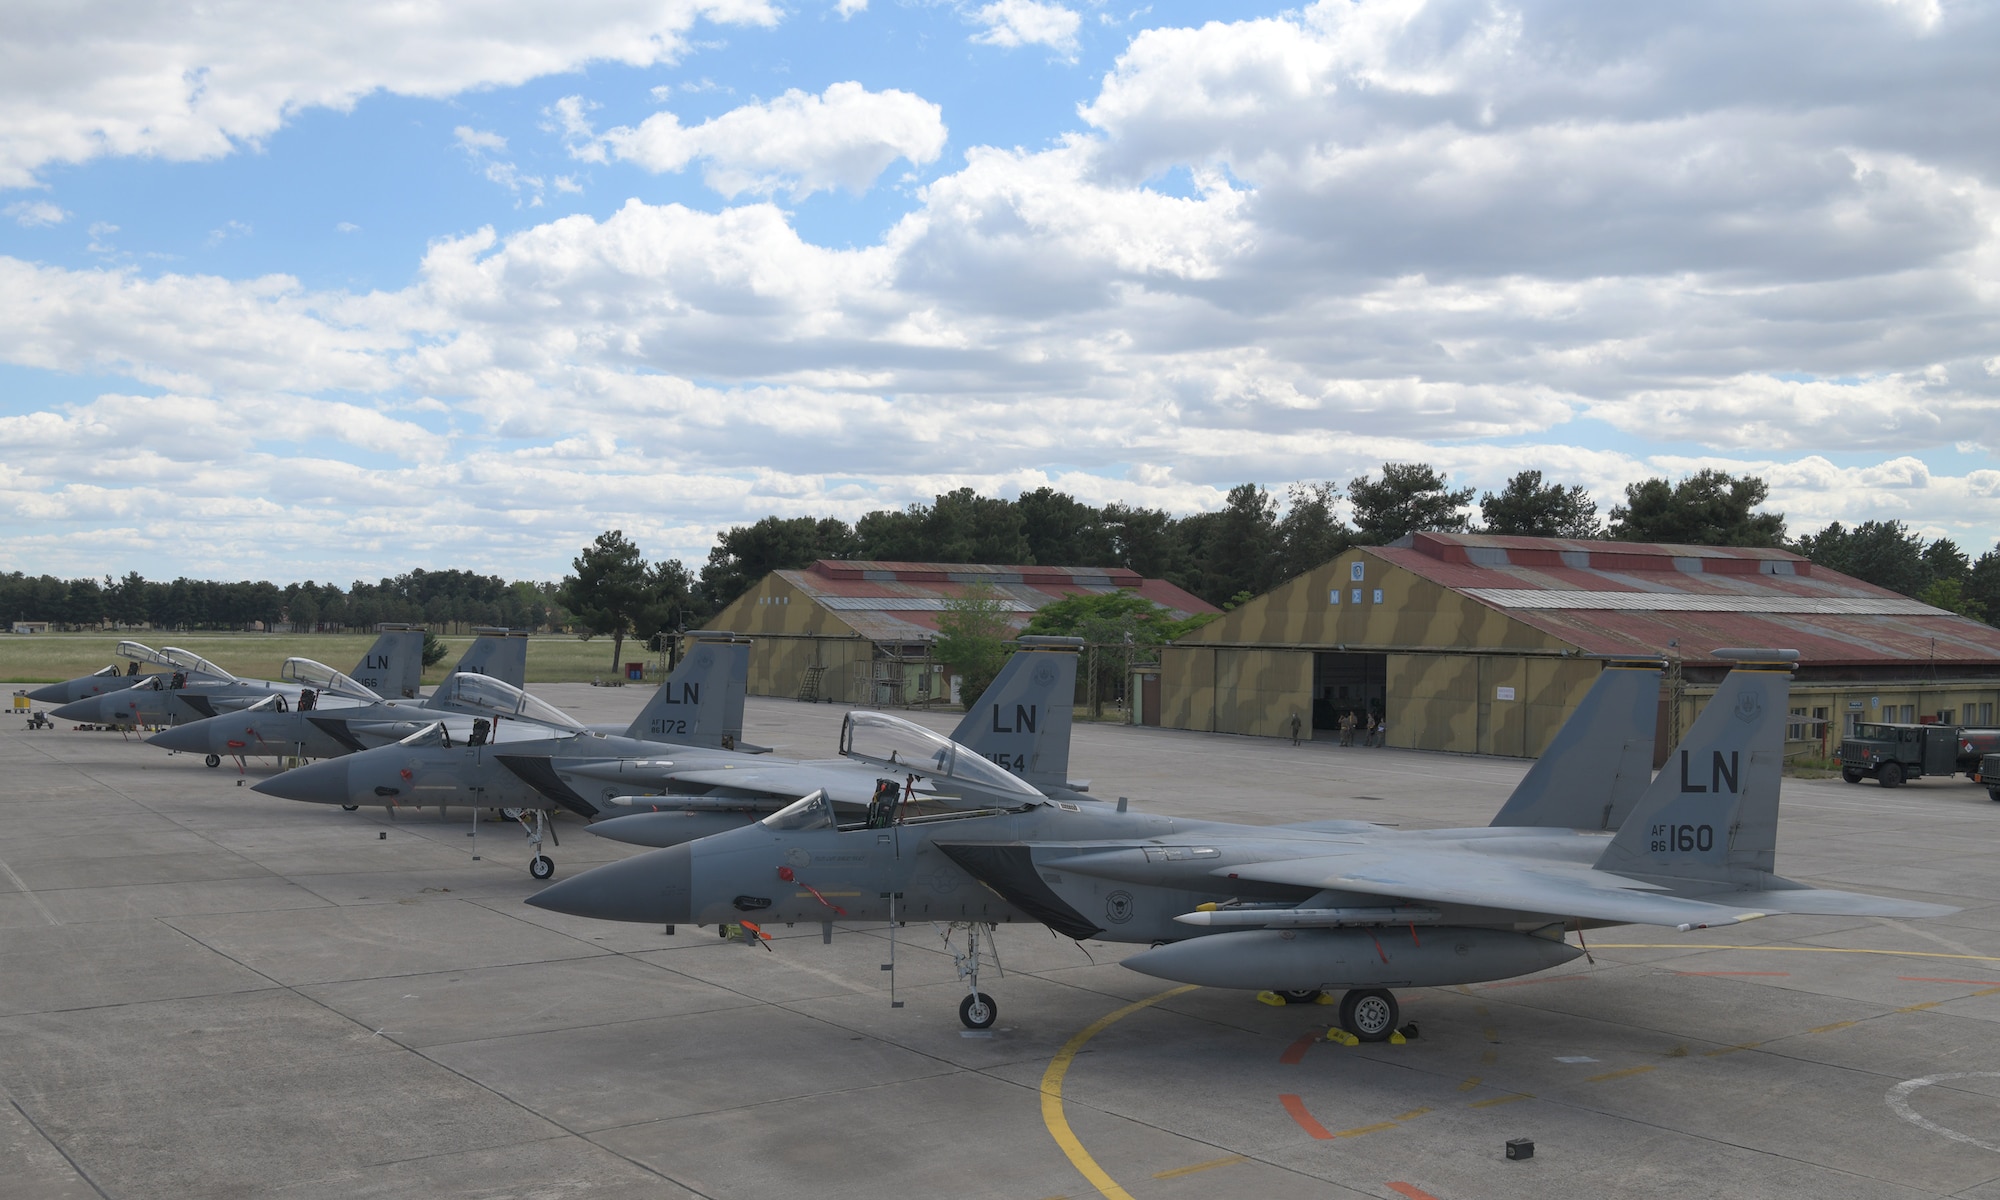 U.S. Air Force F-15C Eagles assigned to the 493th Fighter Squadron are parked on the flightline during exercise Astral Knight 21 at Larissa Air Base, Greece, May 21, 2021. The 48th Fighter Wing deployed 12 F-15C/D Eagles and more than 250 Airmen from the 493rd FS, 748th Aircraft Maintenance Squadron and other supporting units to participate in the exercise. (U.S. Air Force photo by Tech. Sgt. Alex Fox Echols III)